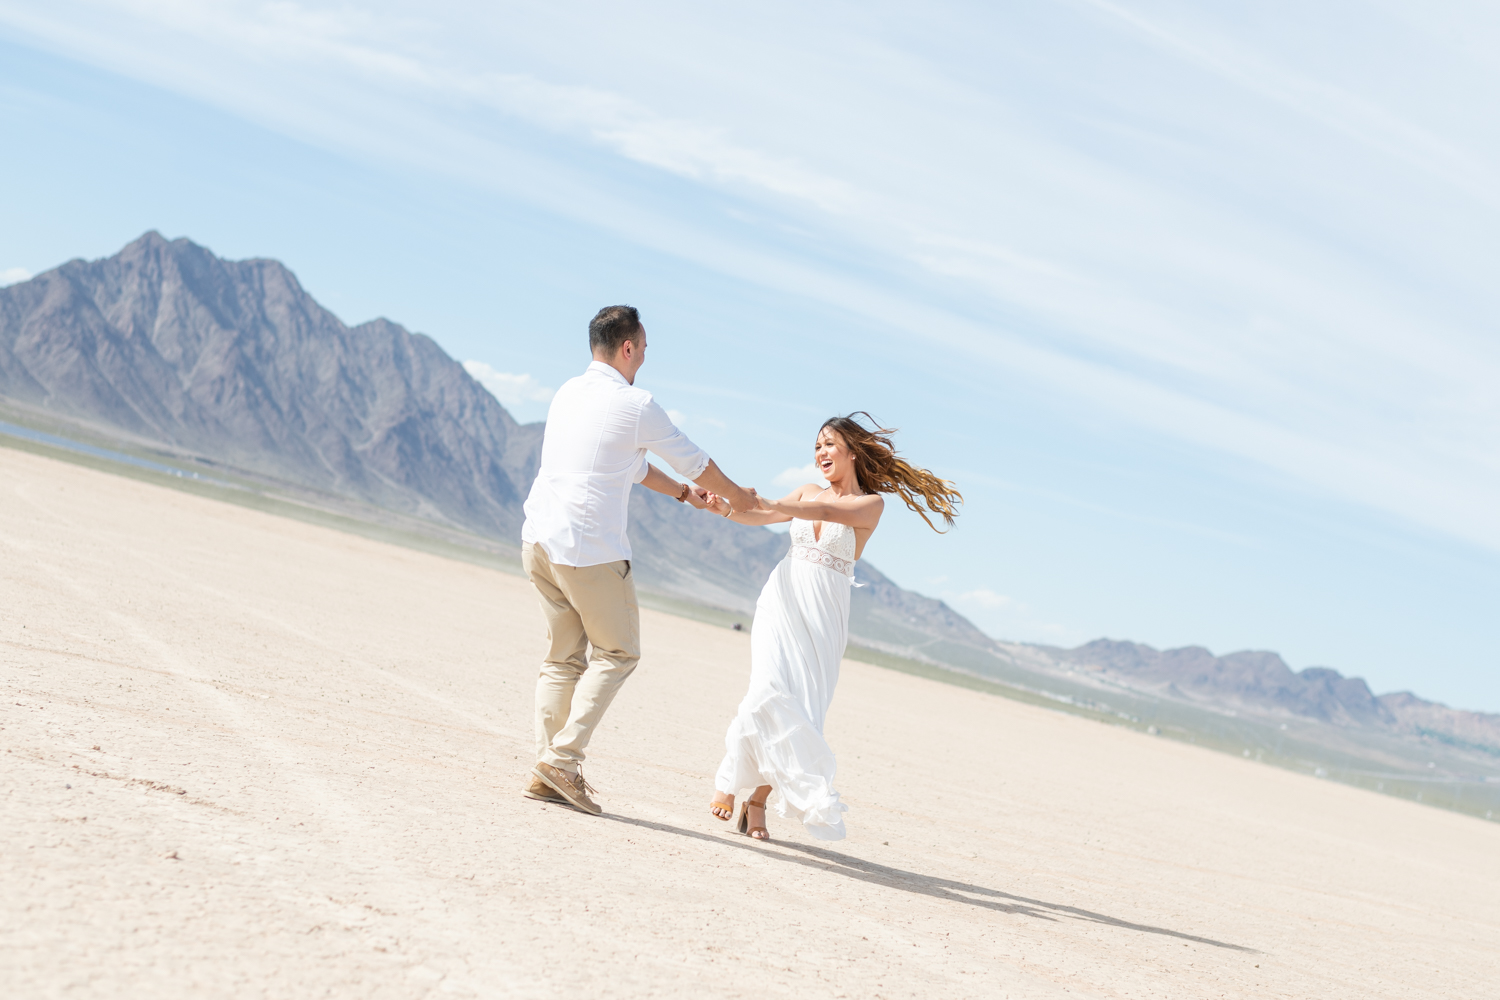 Boy and Girl in white outfits spin around playfully in the dessert